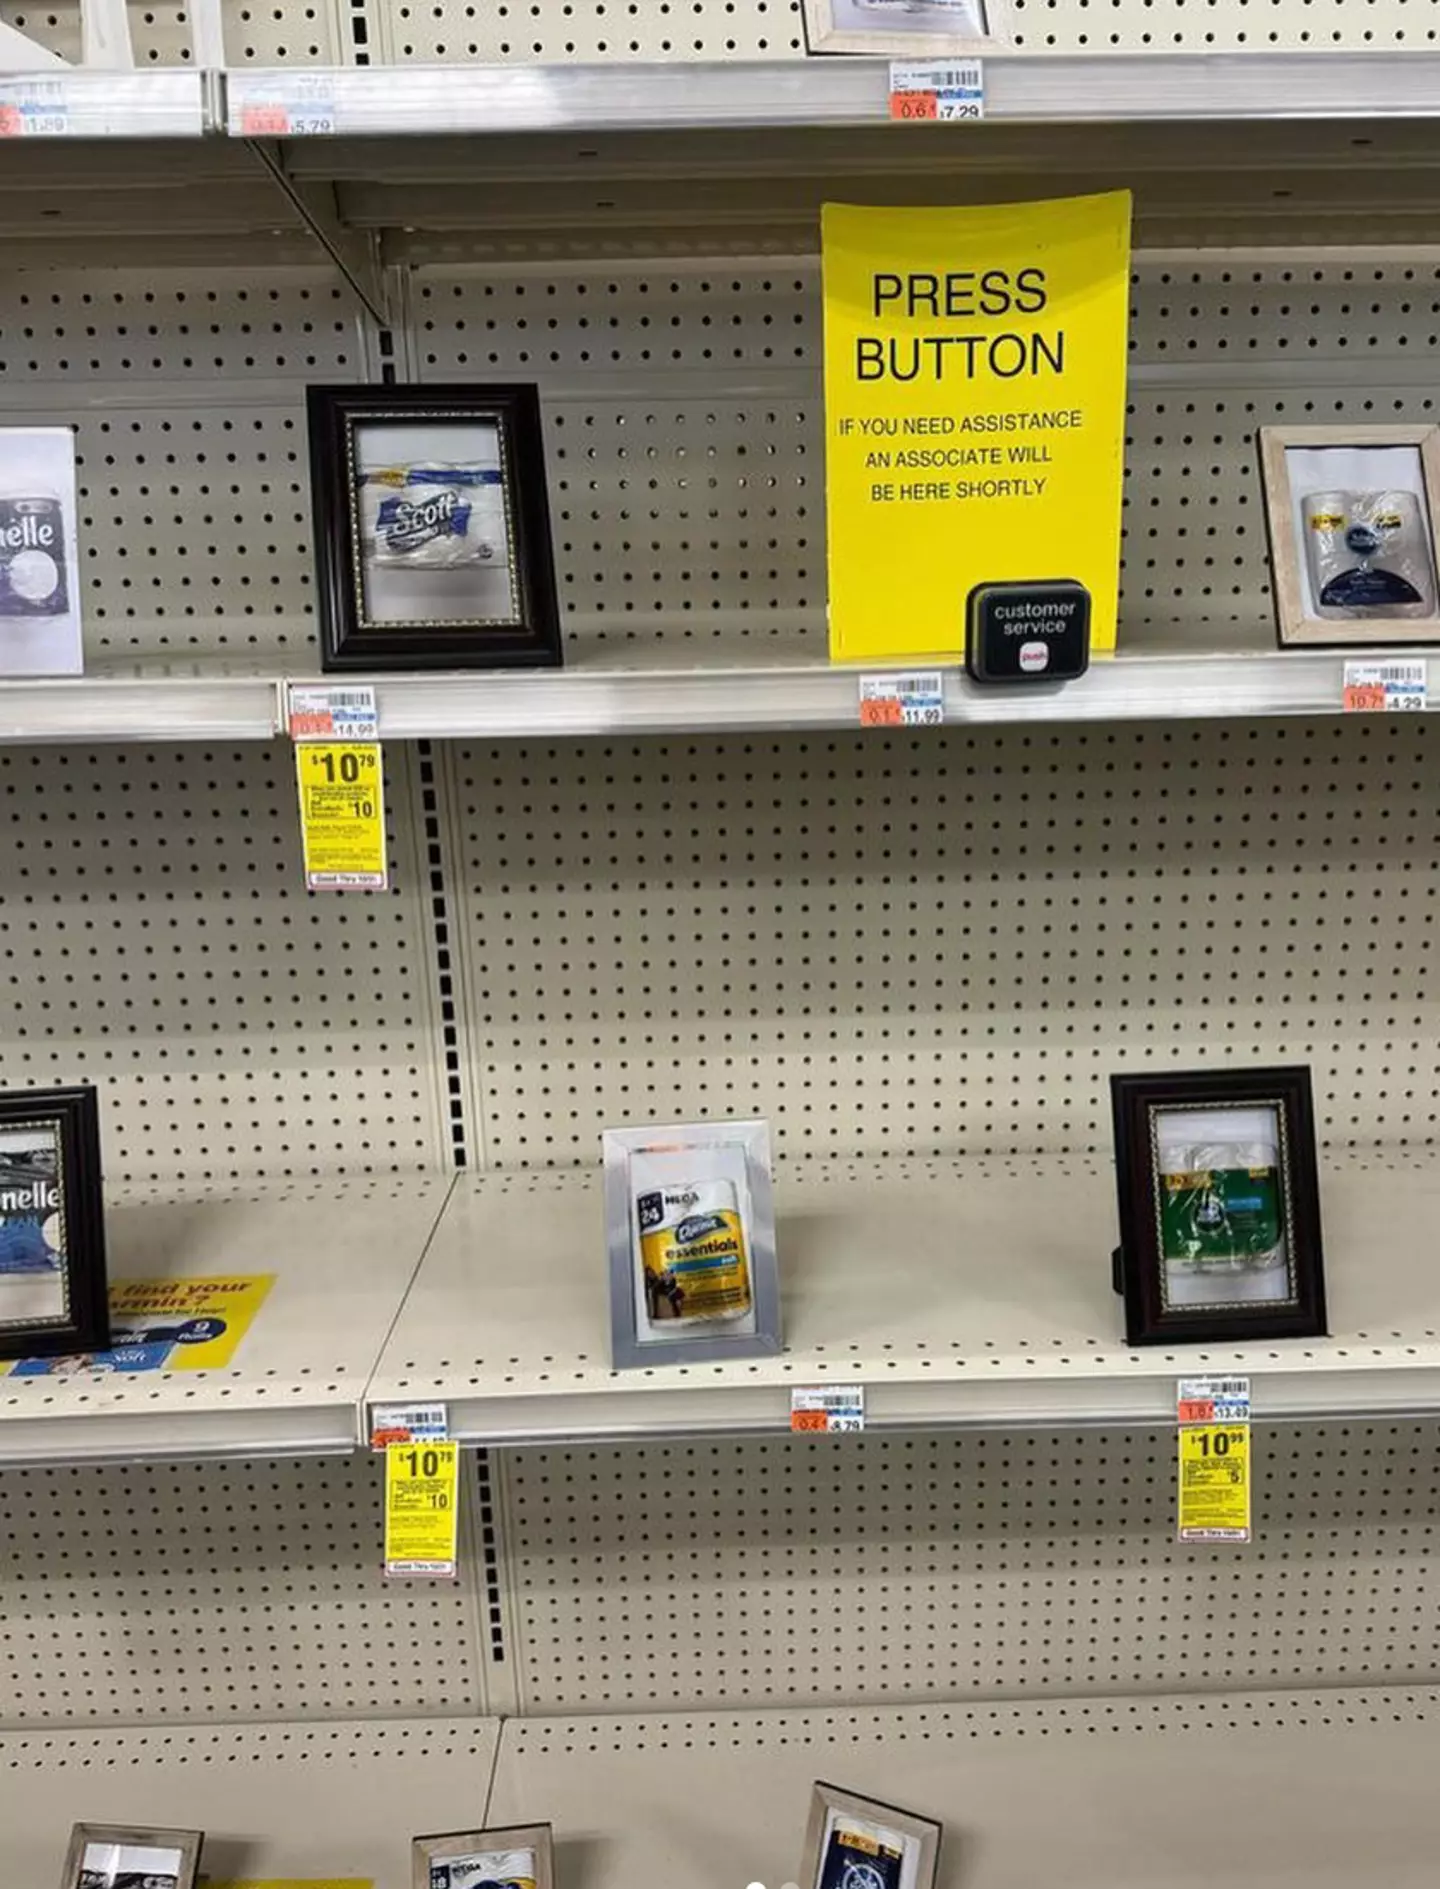 The CVS store now has photographs of its toilet roll products on its shelves.